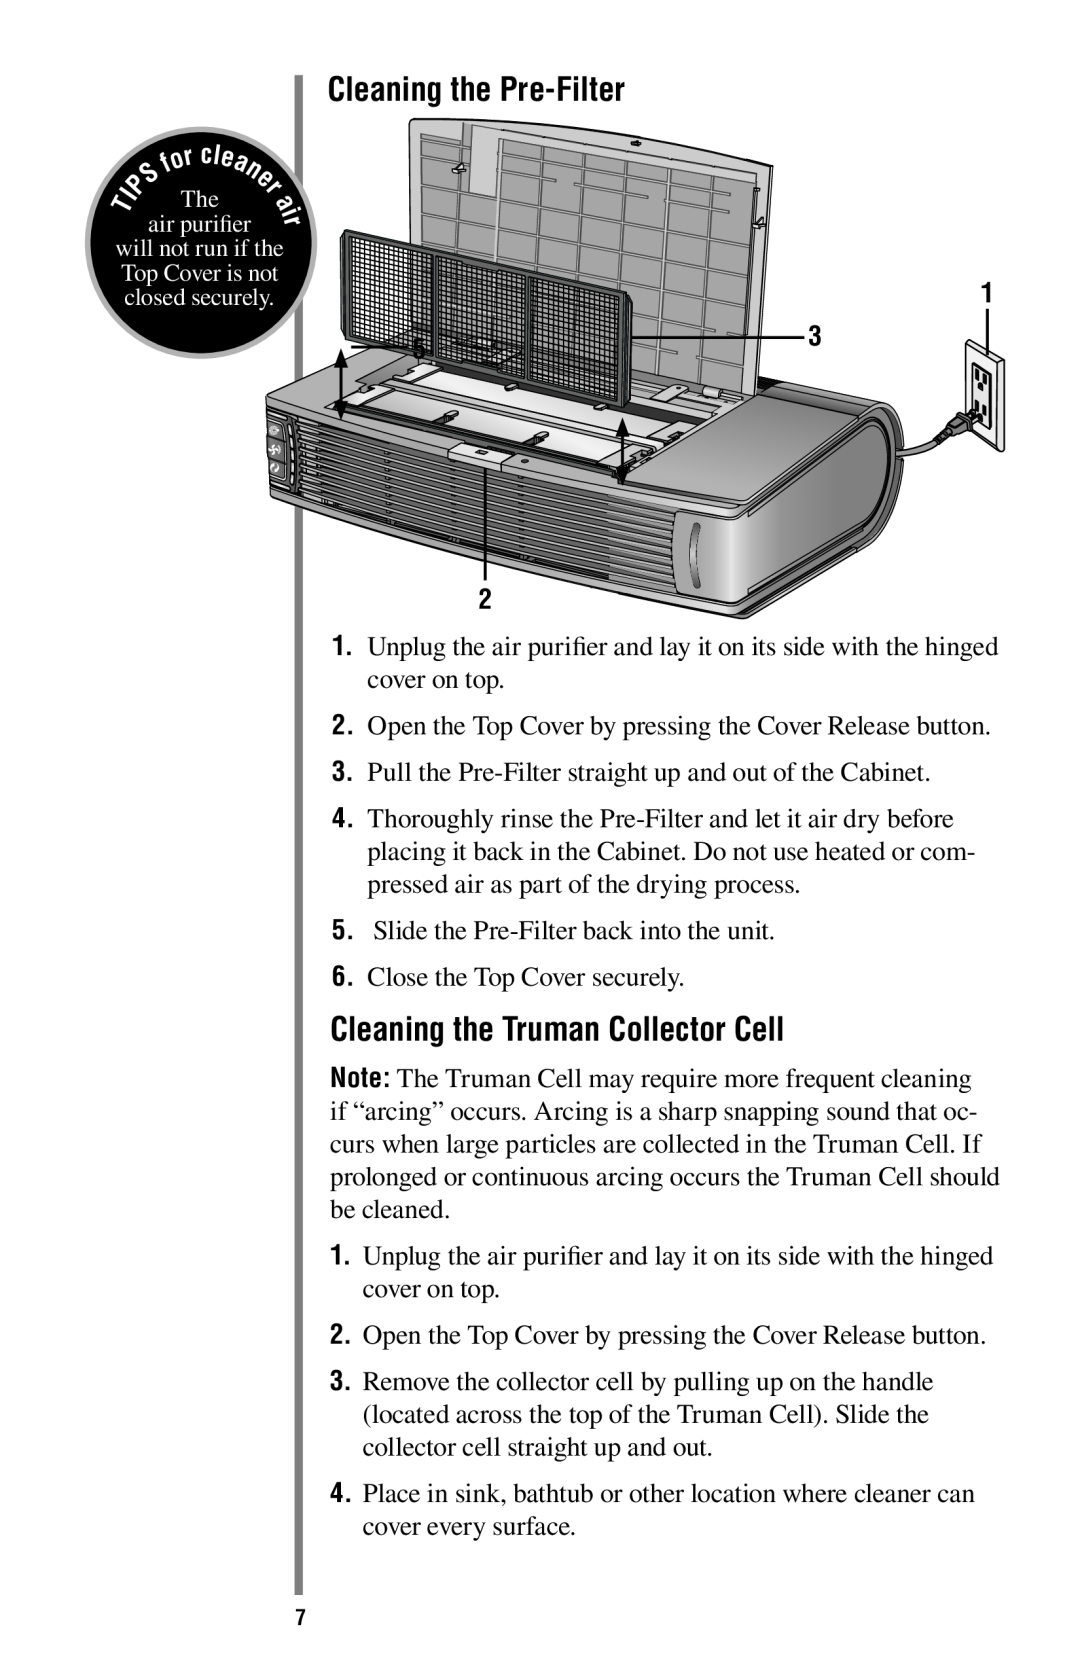 Oreck ProShield Air Purifier manual Cleaning the Truman Collector Cell, Cleaning the Pre-Filter 